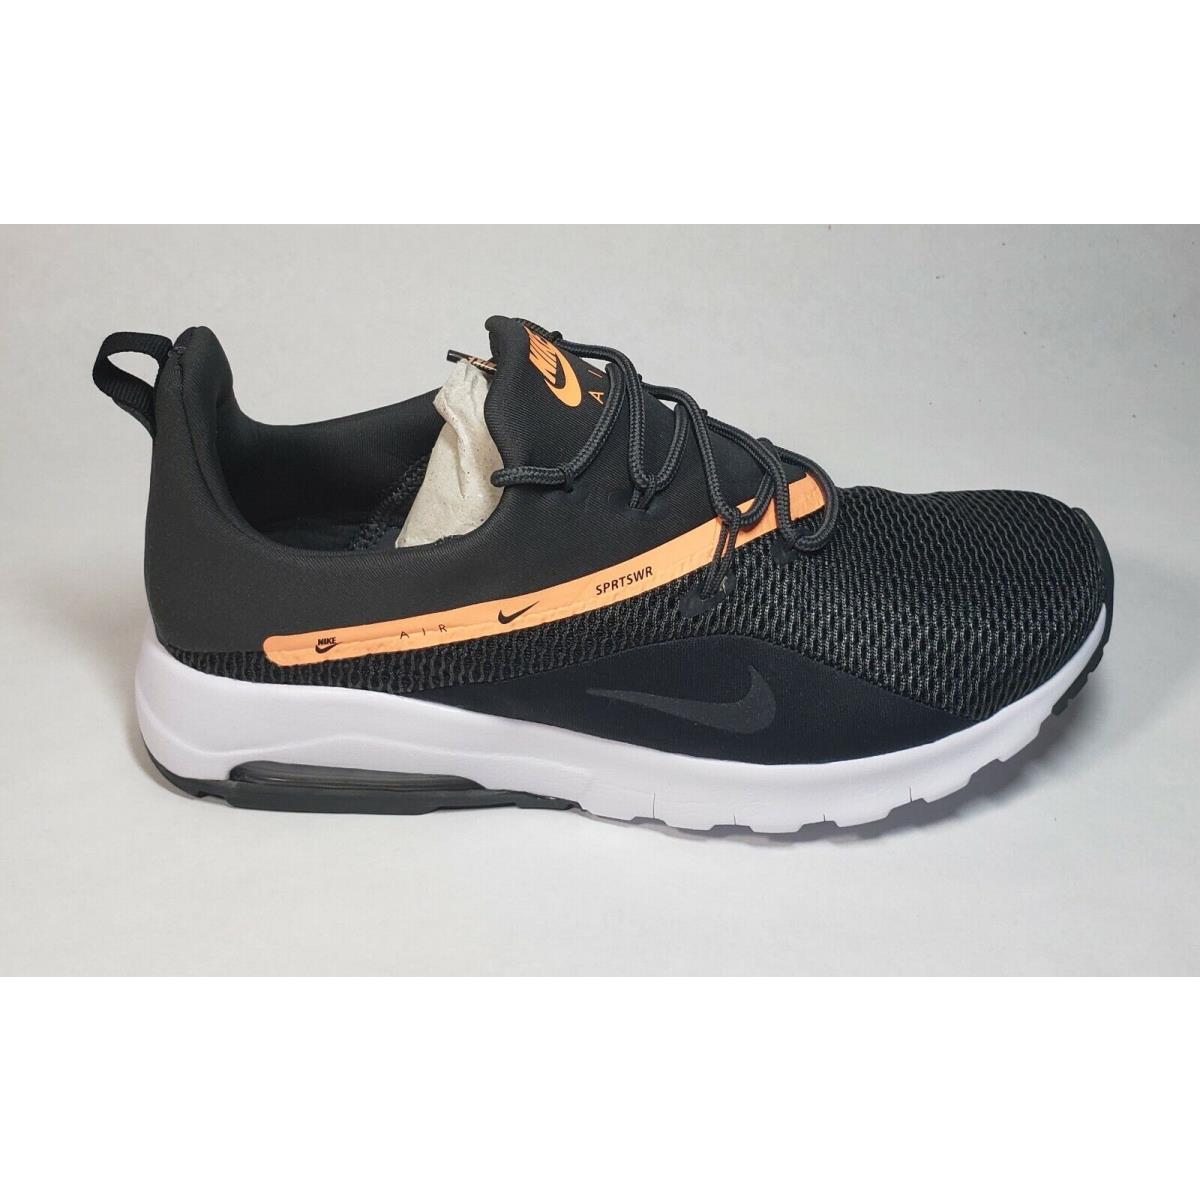 Air Max Motion Racer 2 Women AA2182 003 Black Grey Running Shoes 883212656735 - shoes Max Motion Racer - Gray | SporTipTop